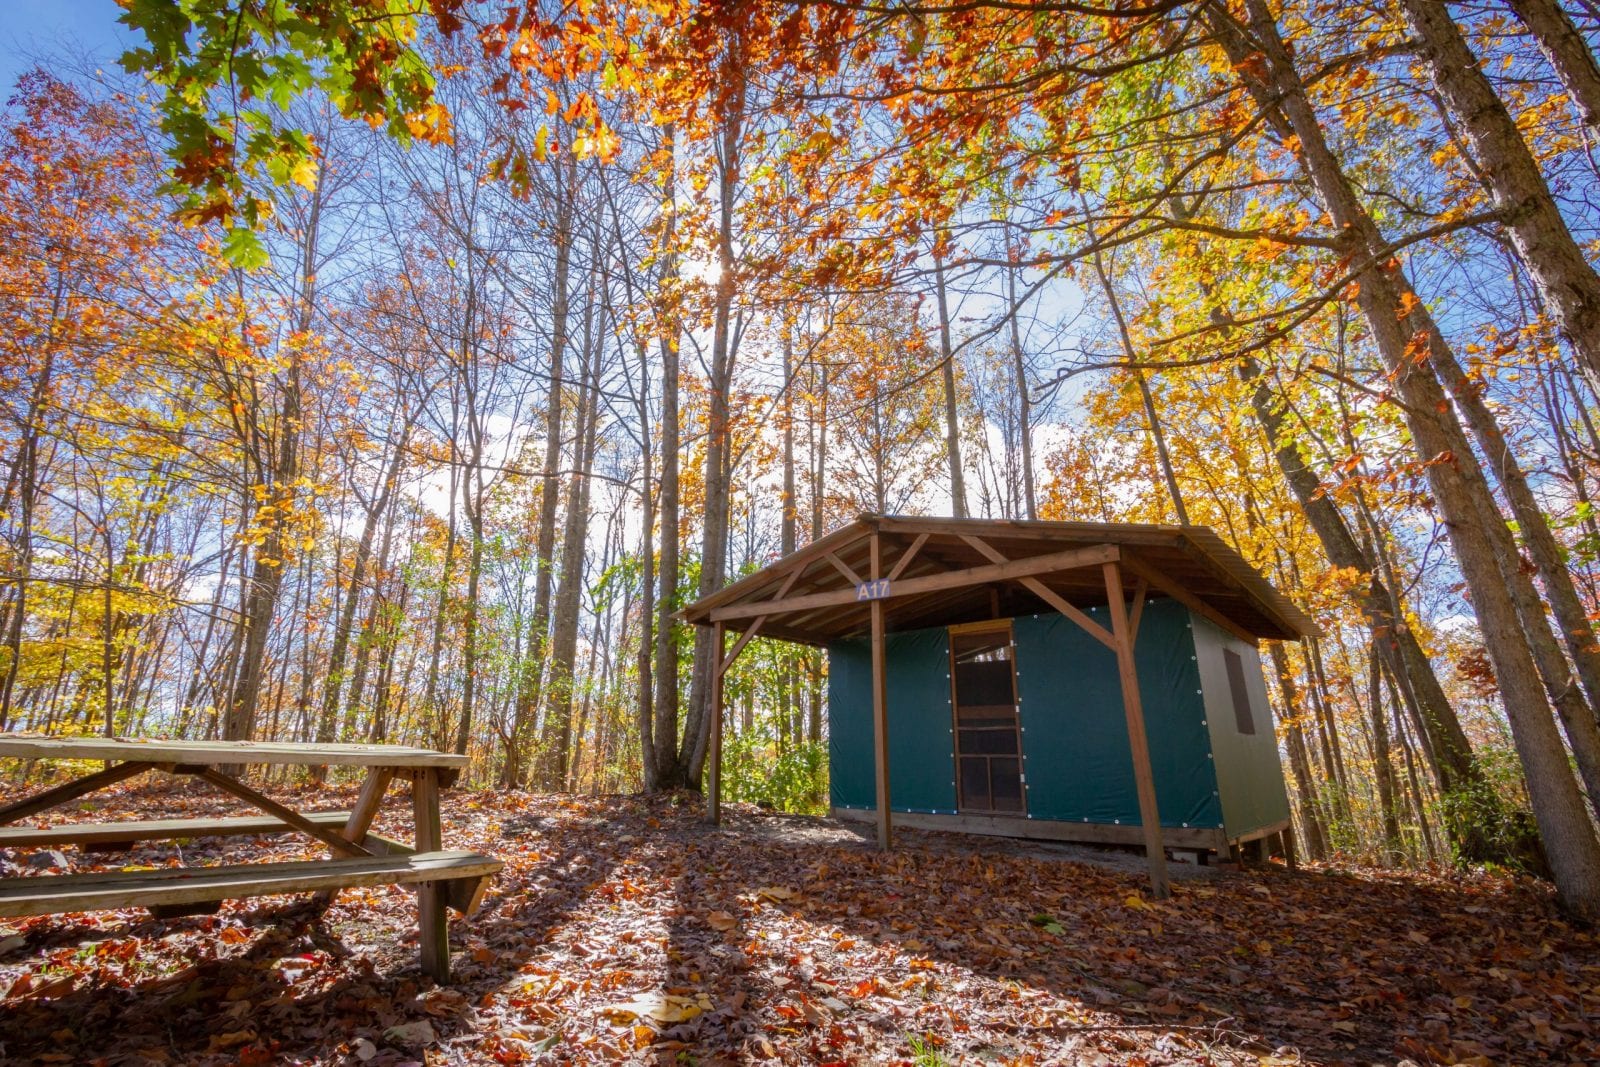 ACE's recently updated cabin tents are an affordable new river gorge rustic lodging option